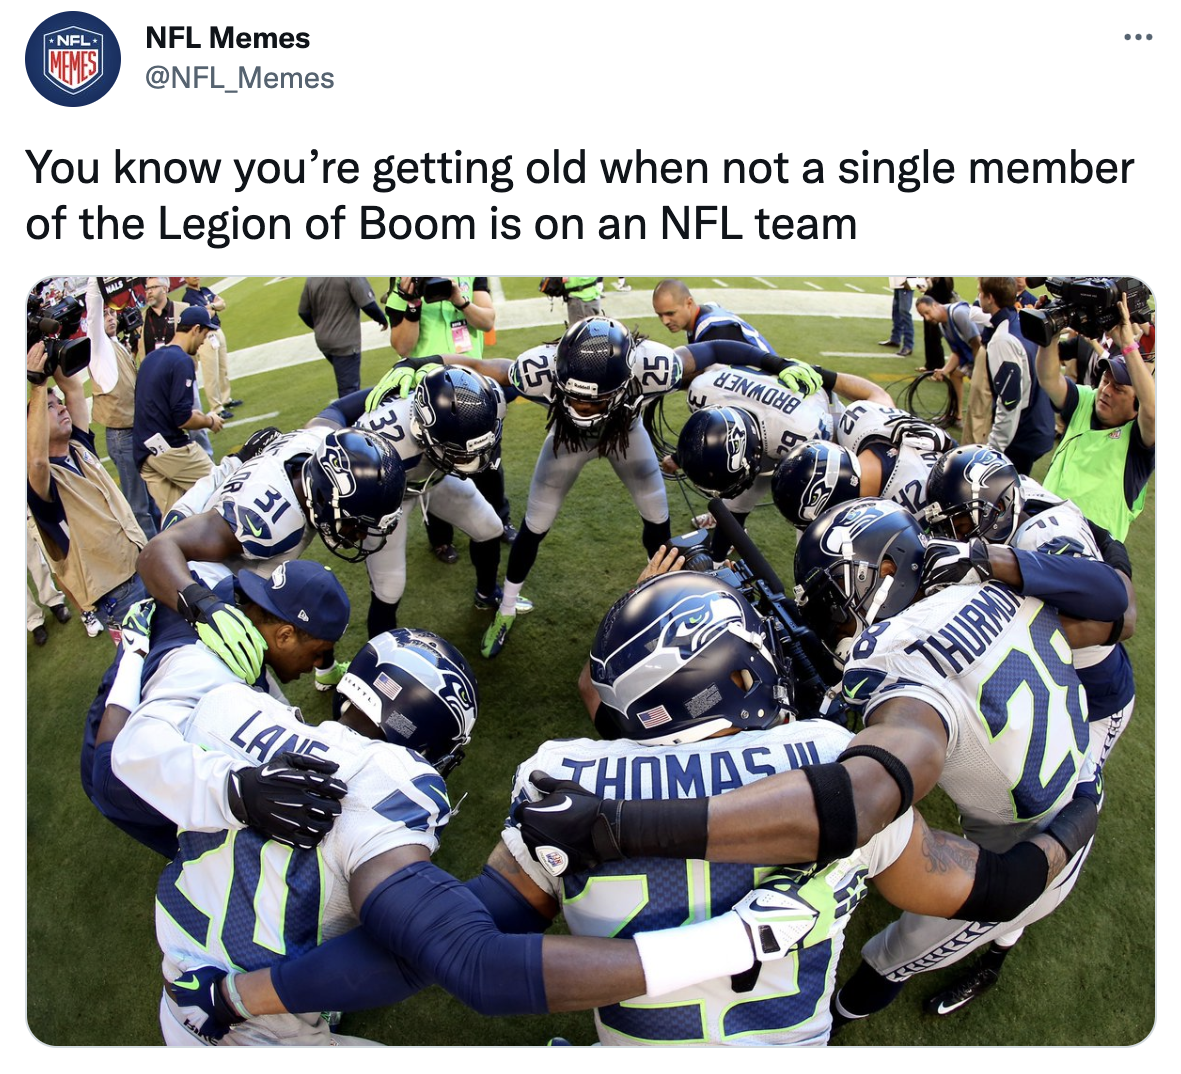 NFL Memes - Mean Machine looking strong…